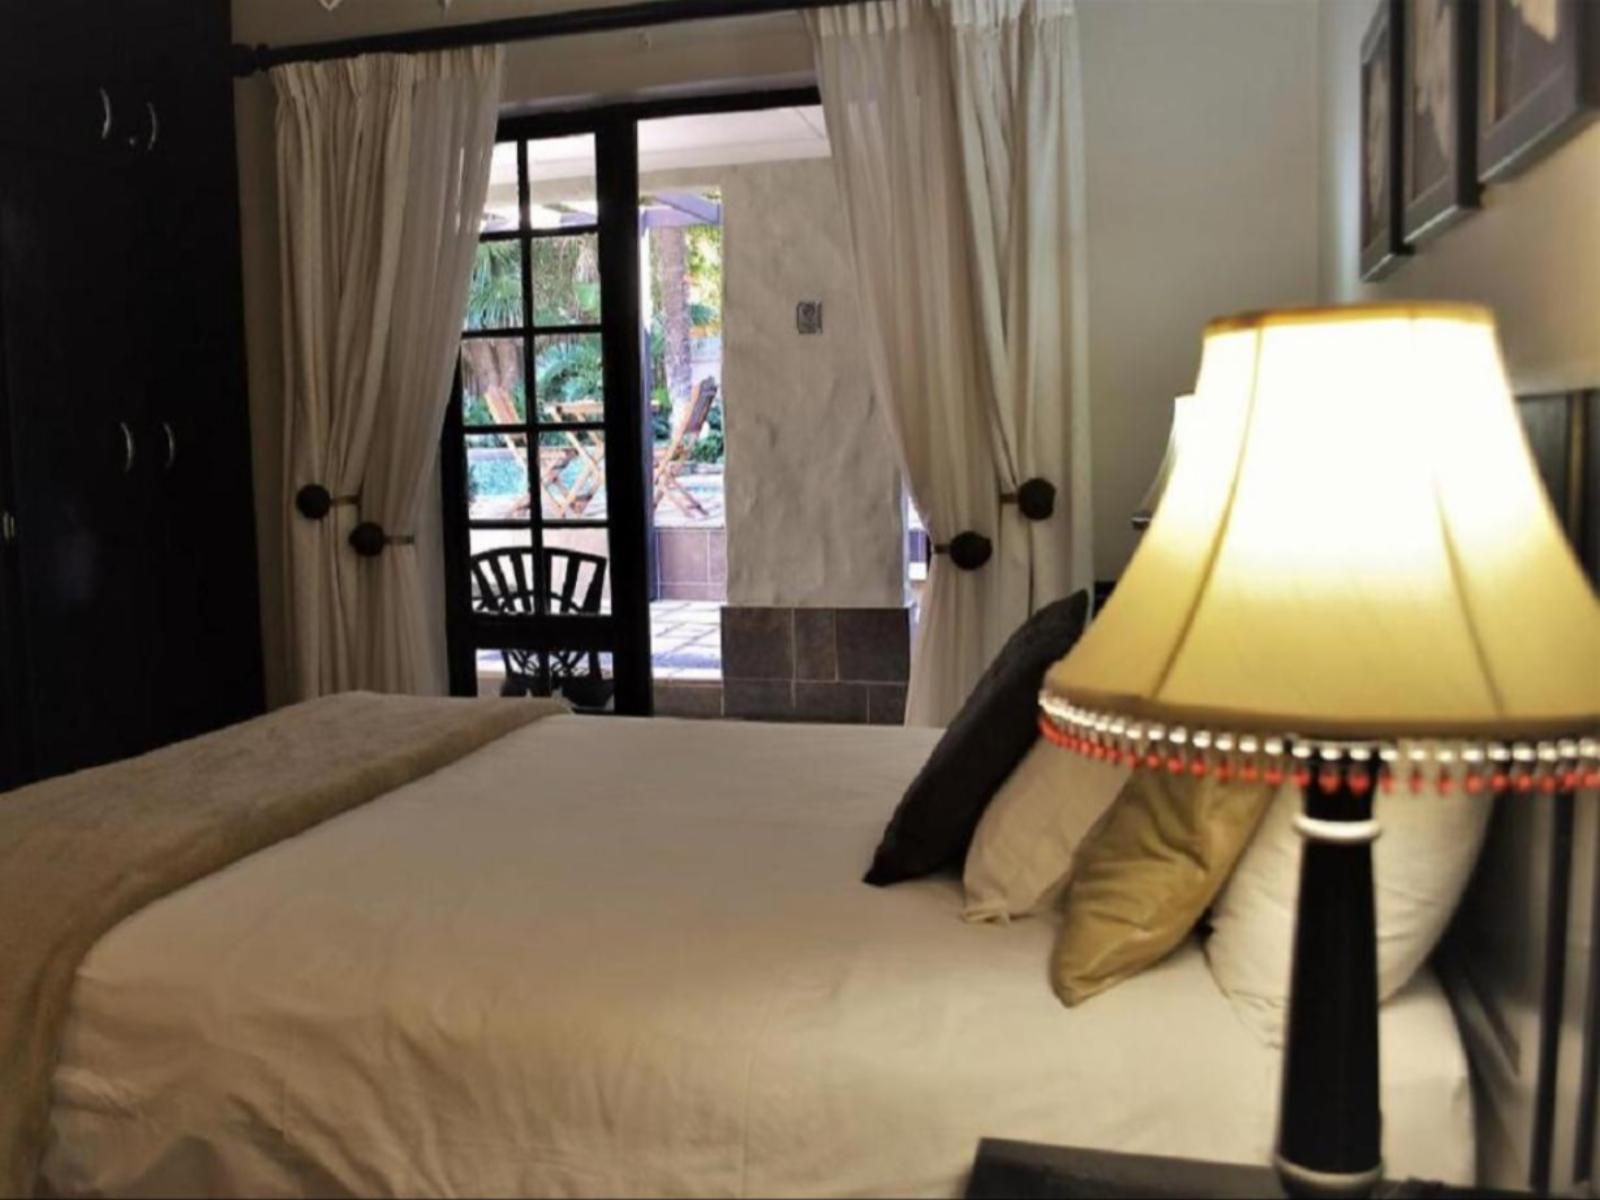 The Villa Guest House Bayswater Bloemfontein Free State South Africa Bedroom